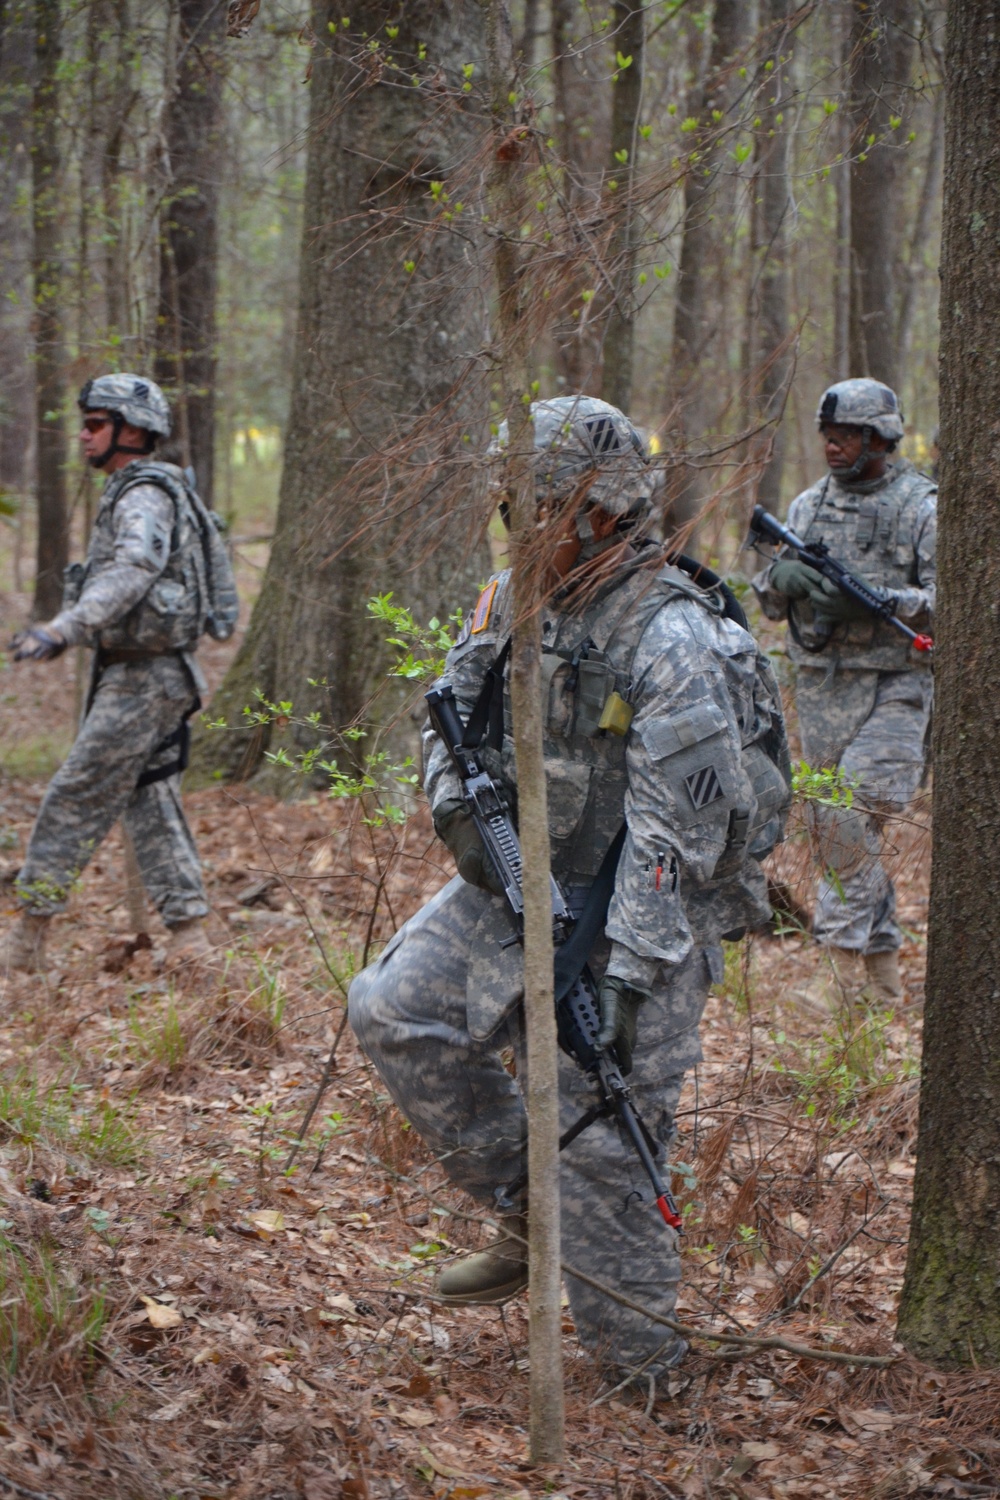 Bringing training back to the woods in Sergeant’s Time